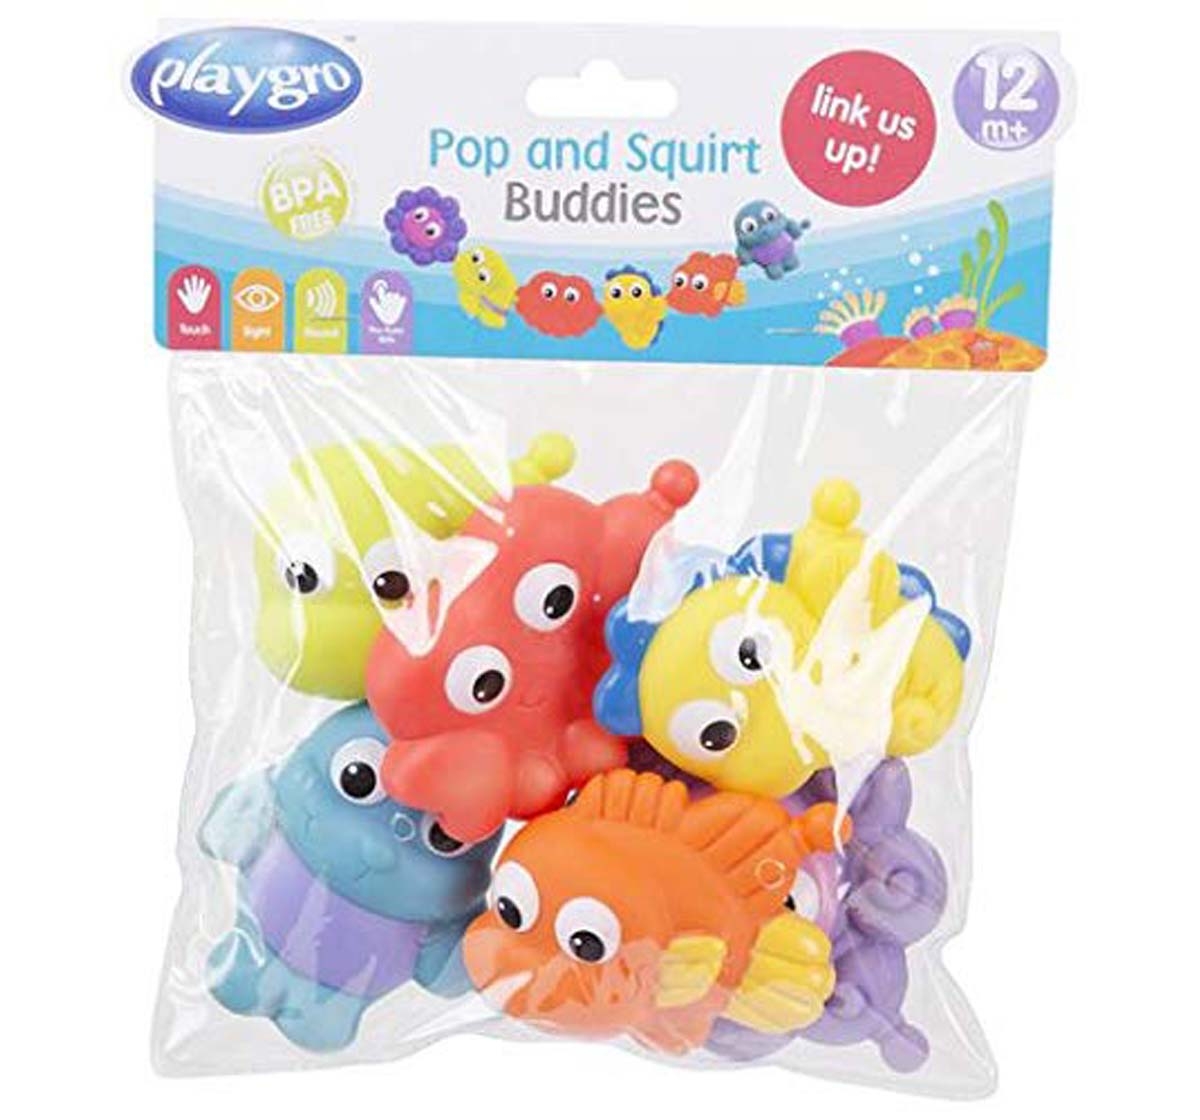 Playgro | Playgro Pop And Squirt Buddies (6Pcs) Bath Toys & Accessories for Kids Age 12M+